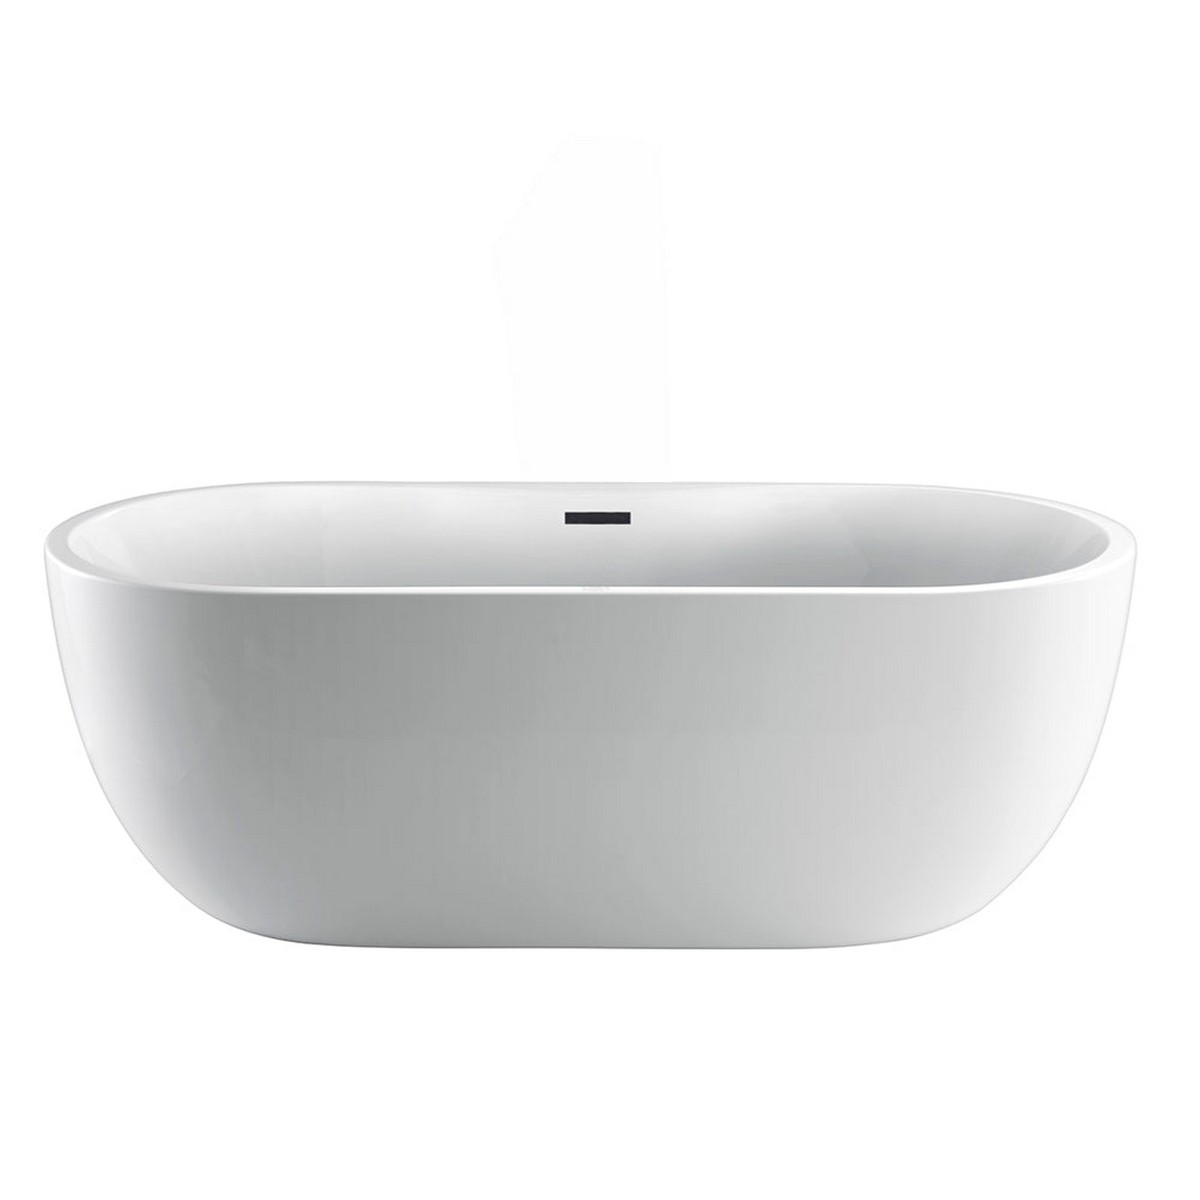 BARCLAY ATOVN65FIG PILAR 65 INCH ACRYLIC FREESTANDING OVAL SOAKING BATHTUB IN WHITE WITH INTEGRAL DRAIN AND OVERFLOW